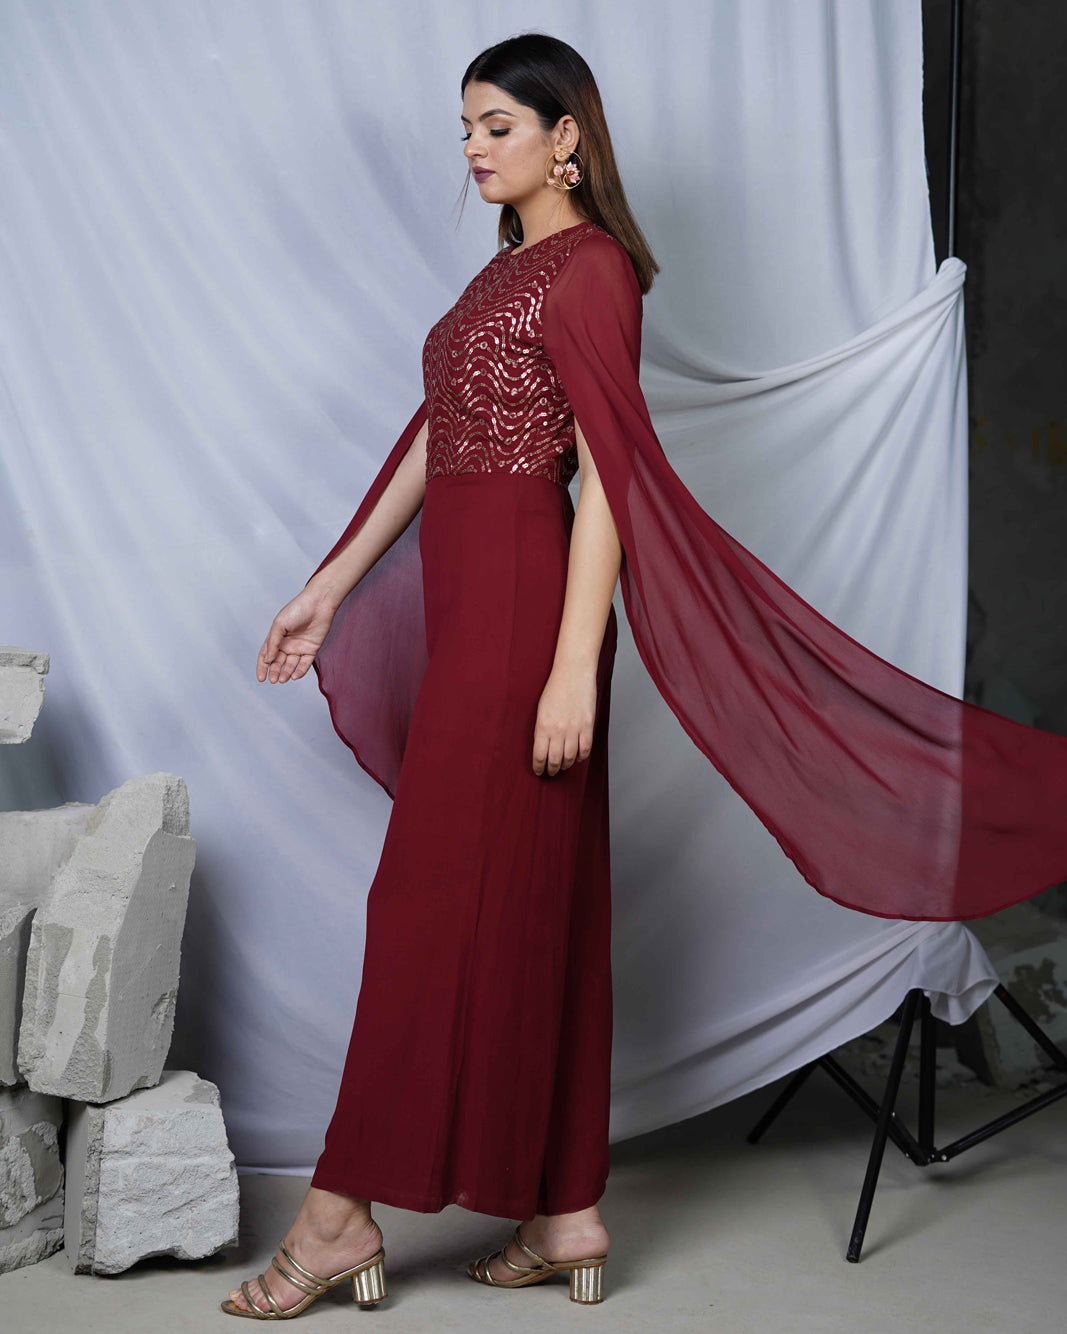 Nazuk Maroon Indo- Western Party Jumpsuit with Cape Sleeves and Gold Embroidery Details for Cocktail